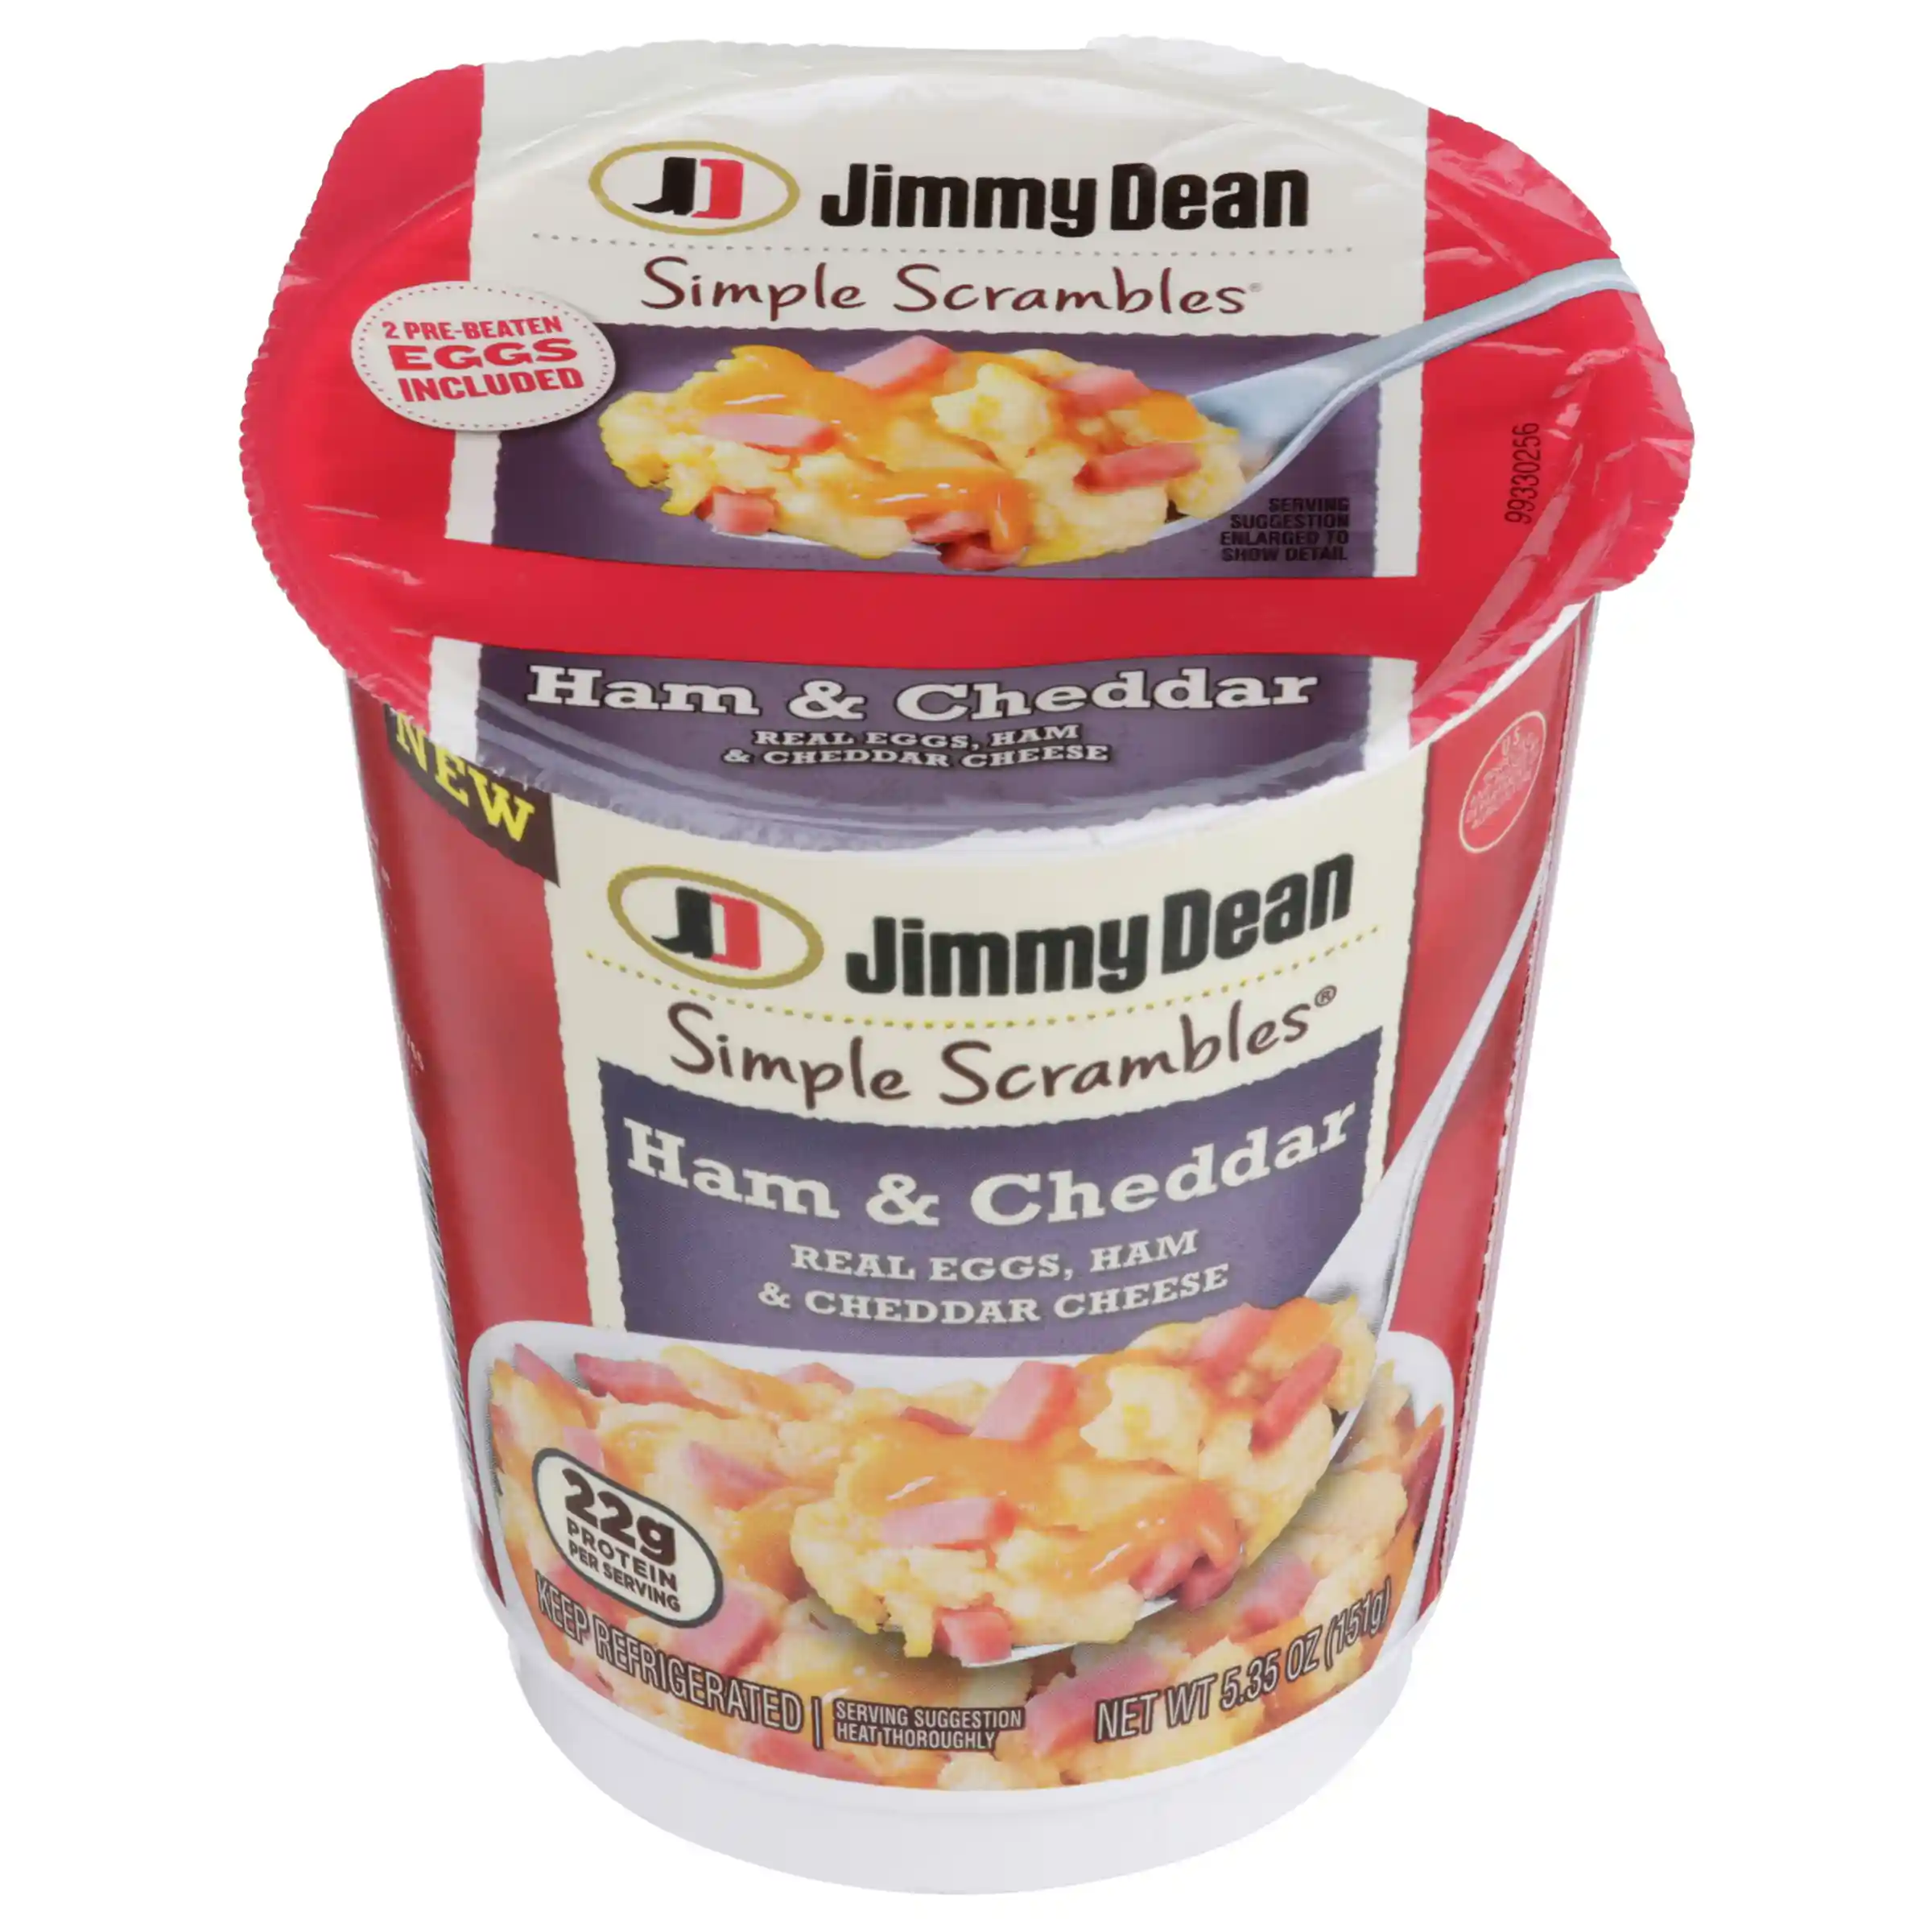 Jimmy Dean Simple Scrambles Ham & Cheddar with Real Eggs, Ham and Cheddar Cheese, 5.35 oz Cup_image_11